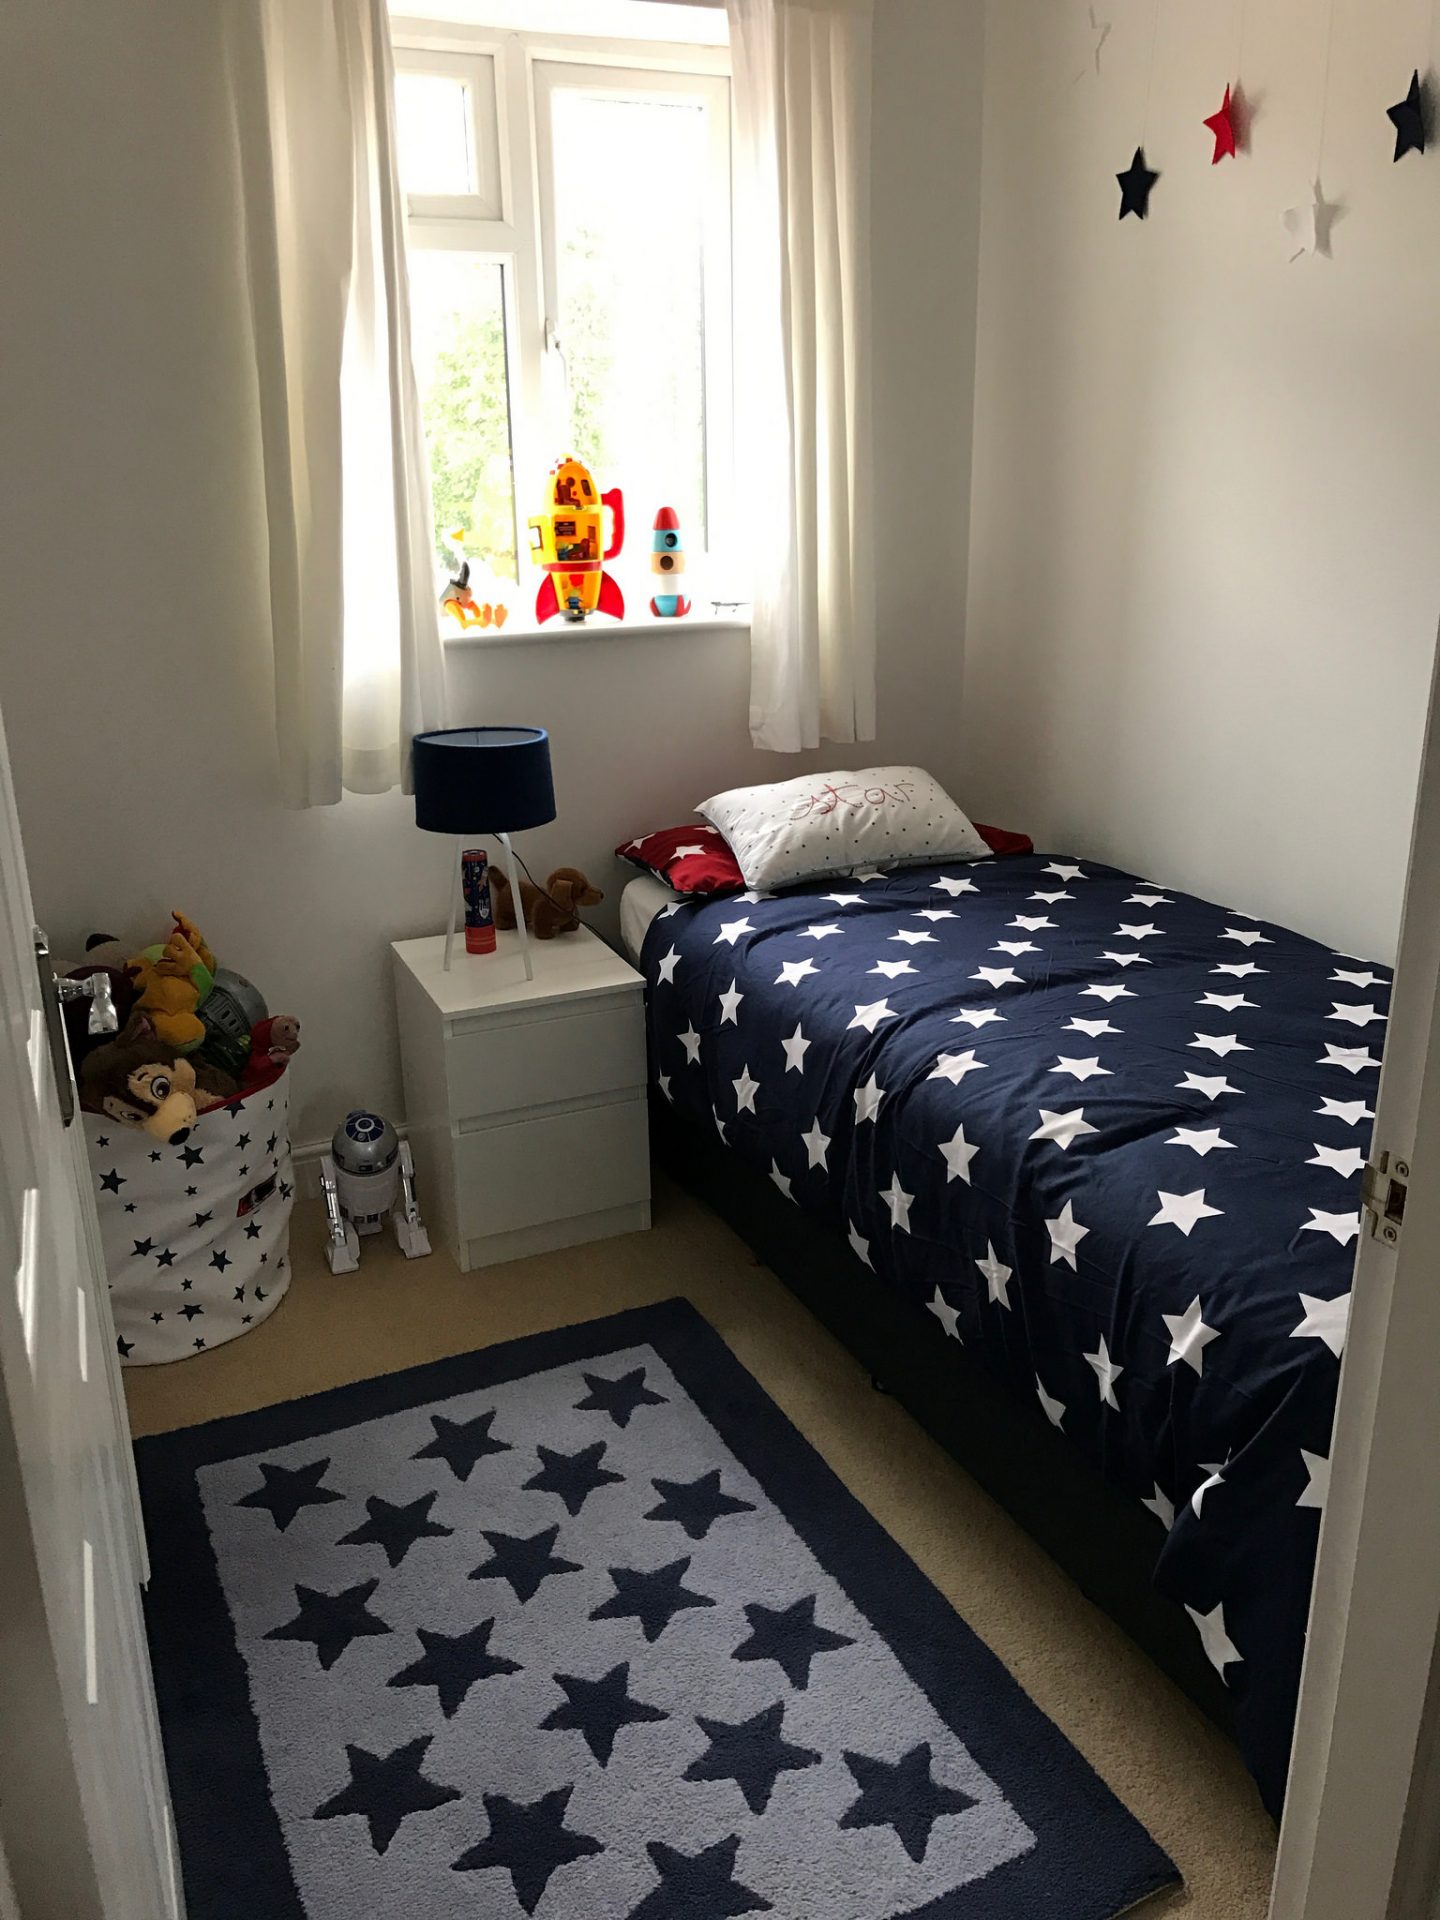 Space themed boy's bedroom